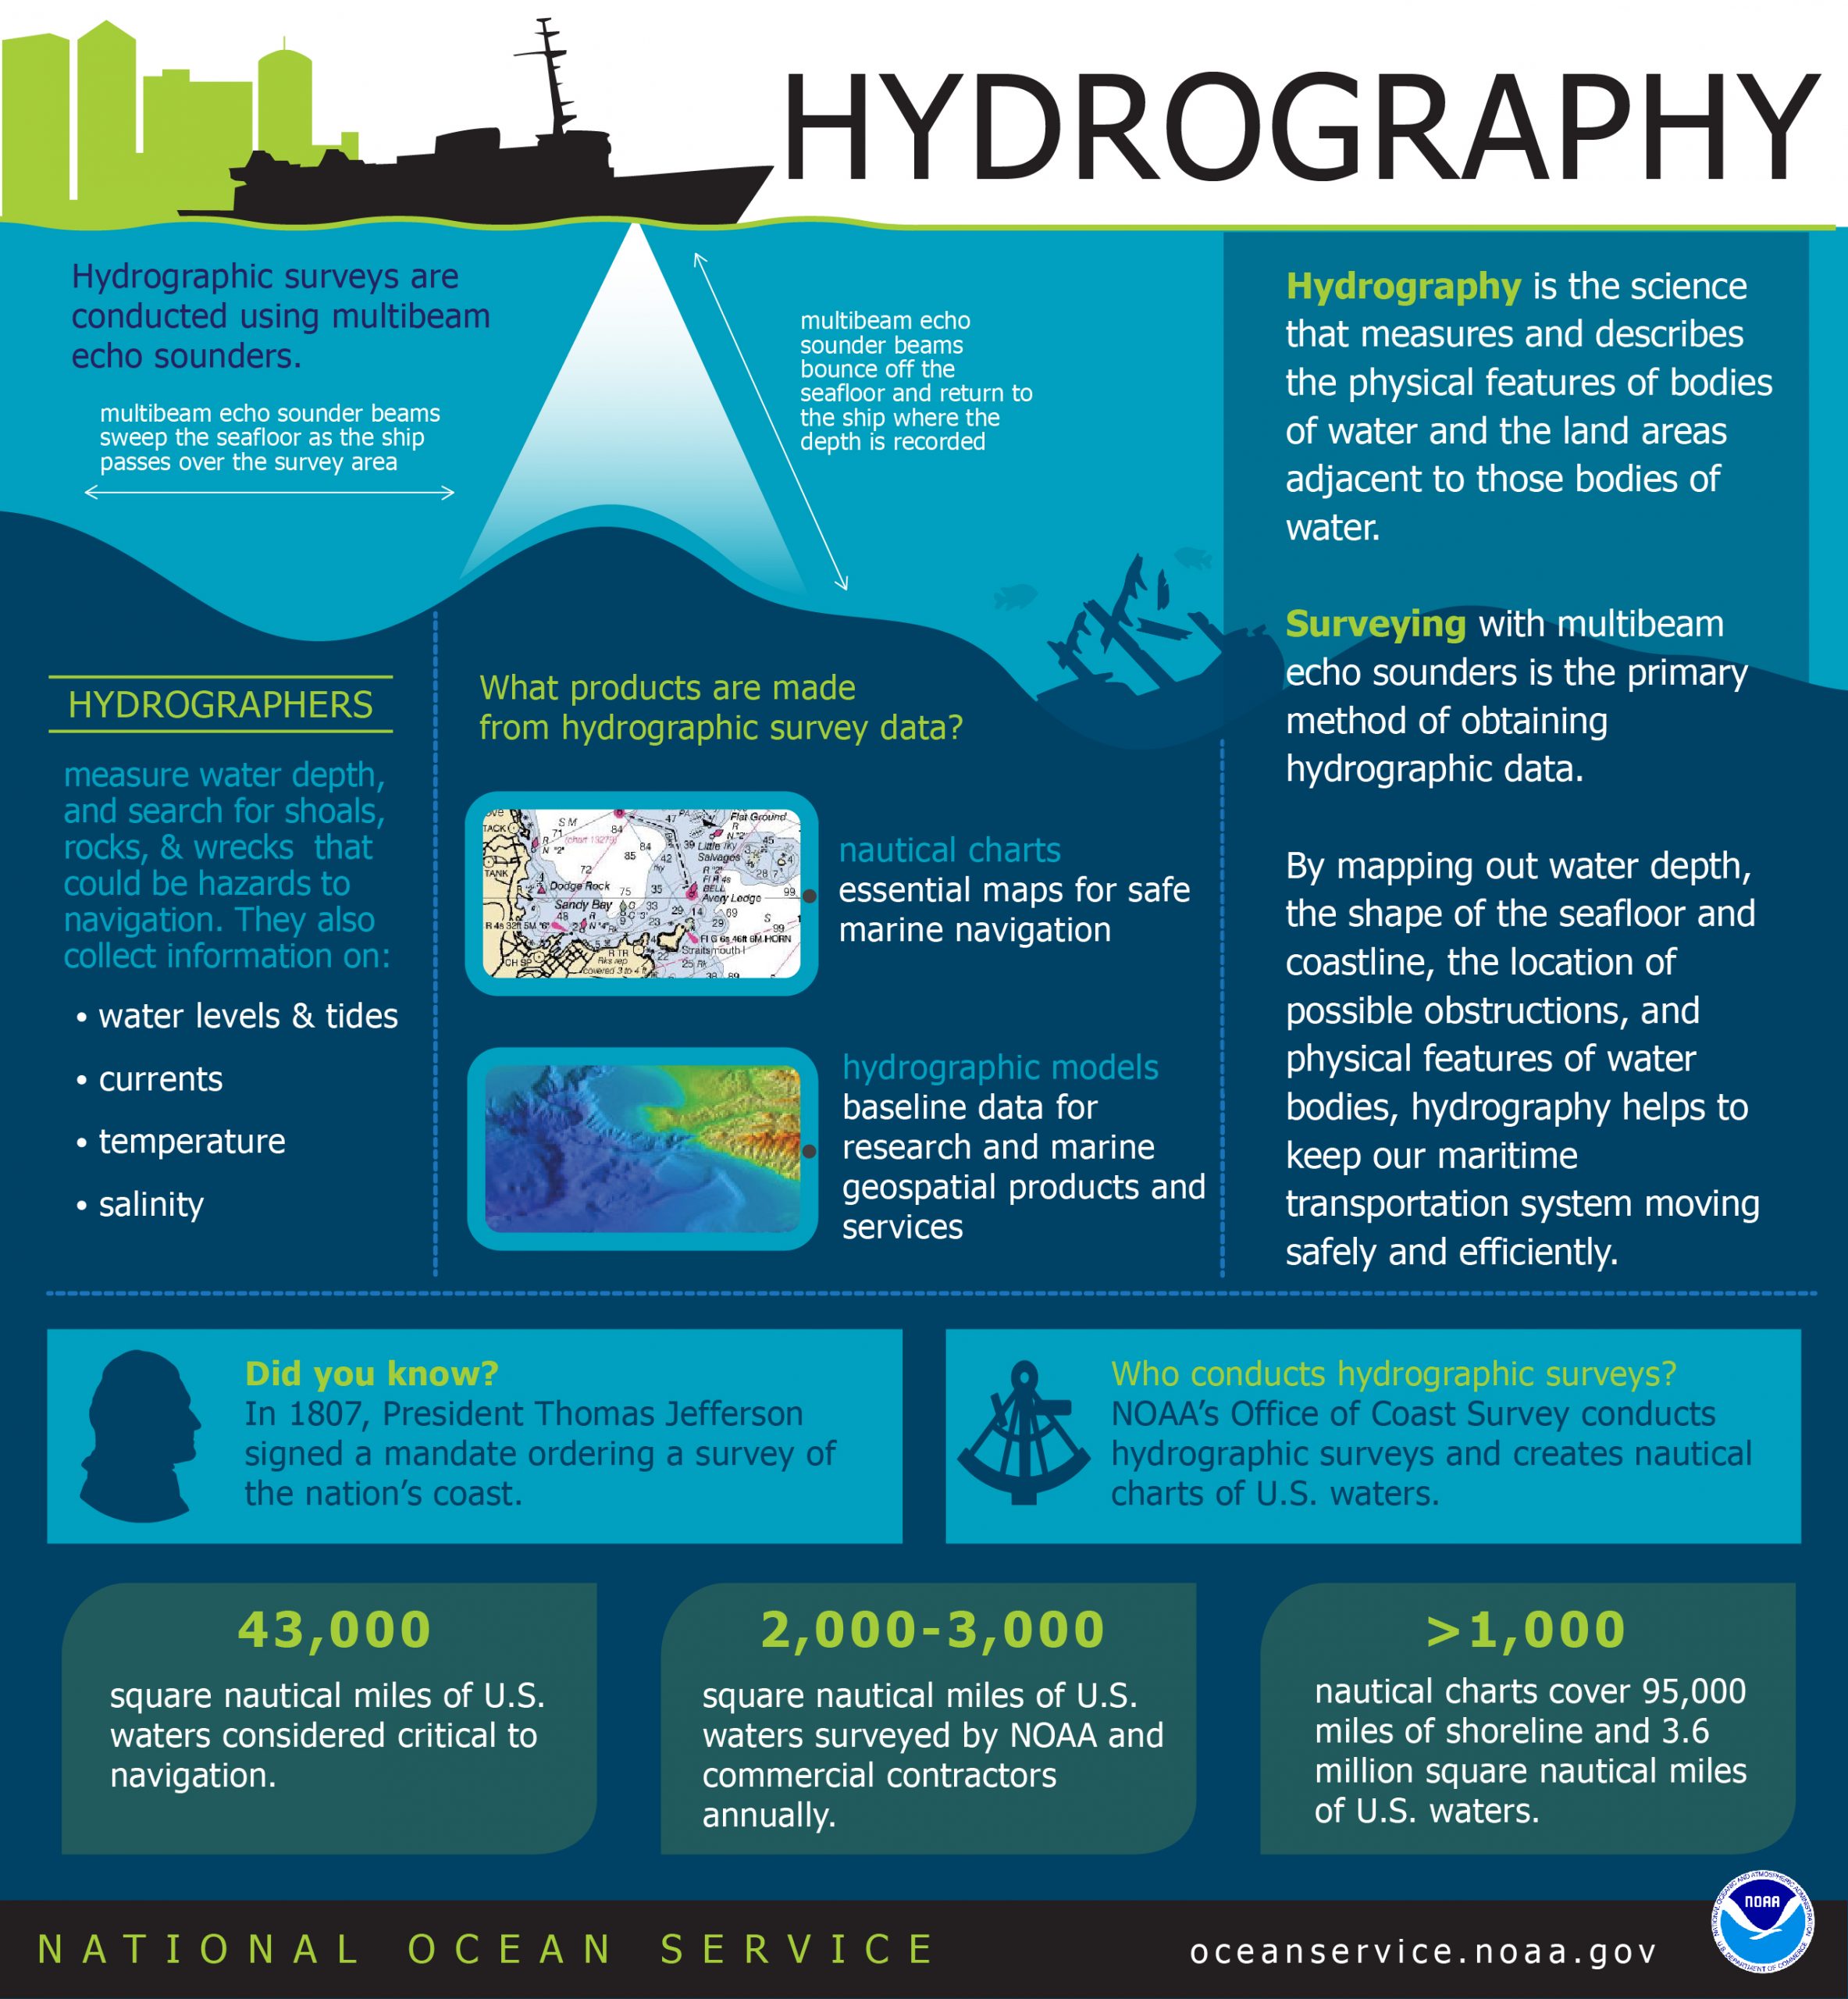 Hydrography Infographic from the National Ocean Service